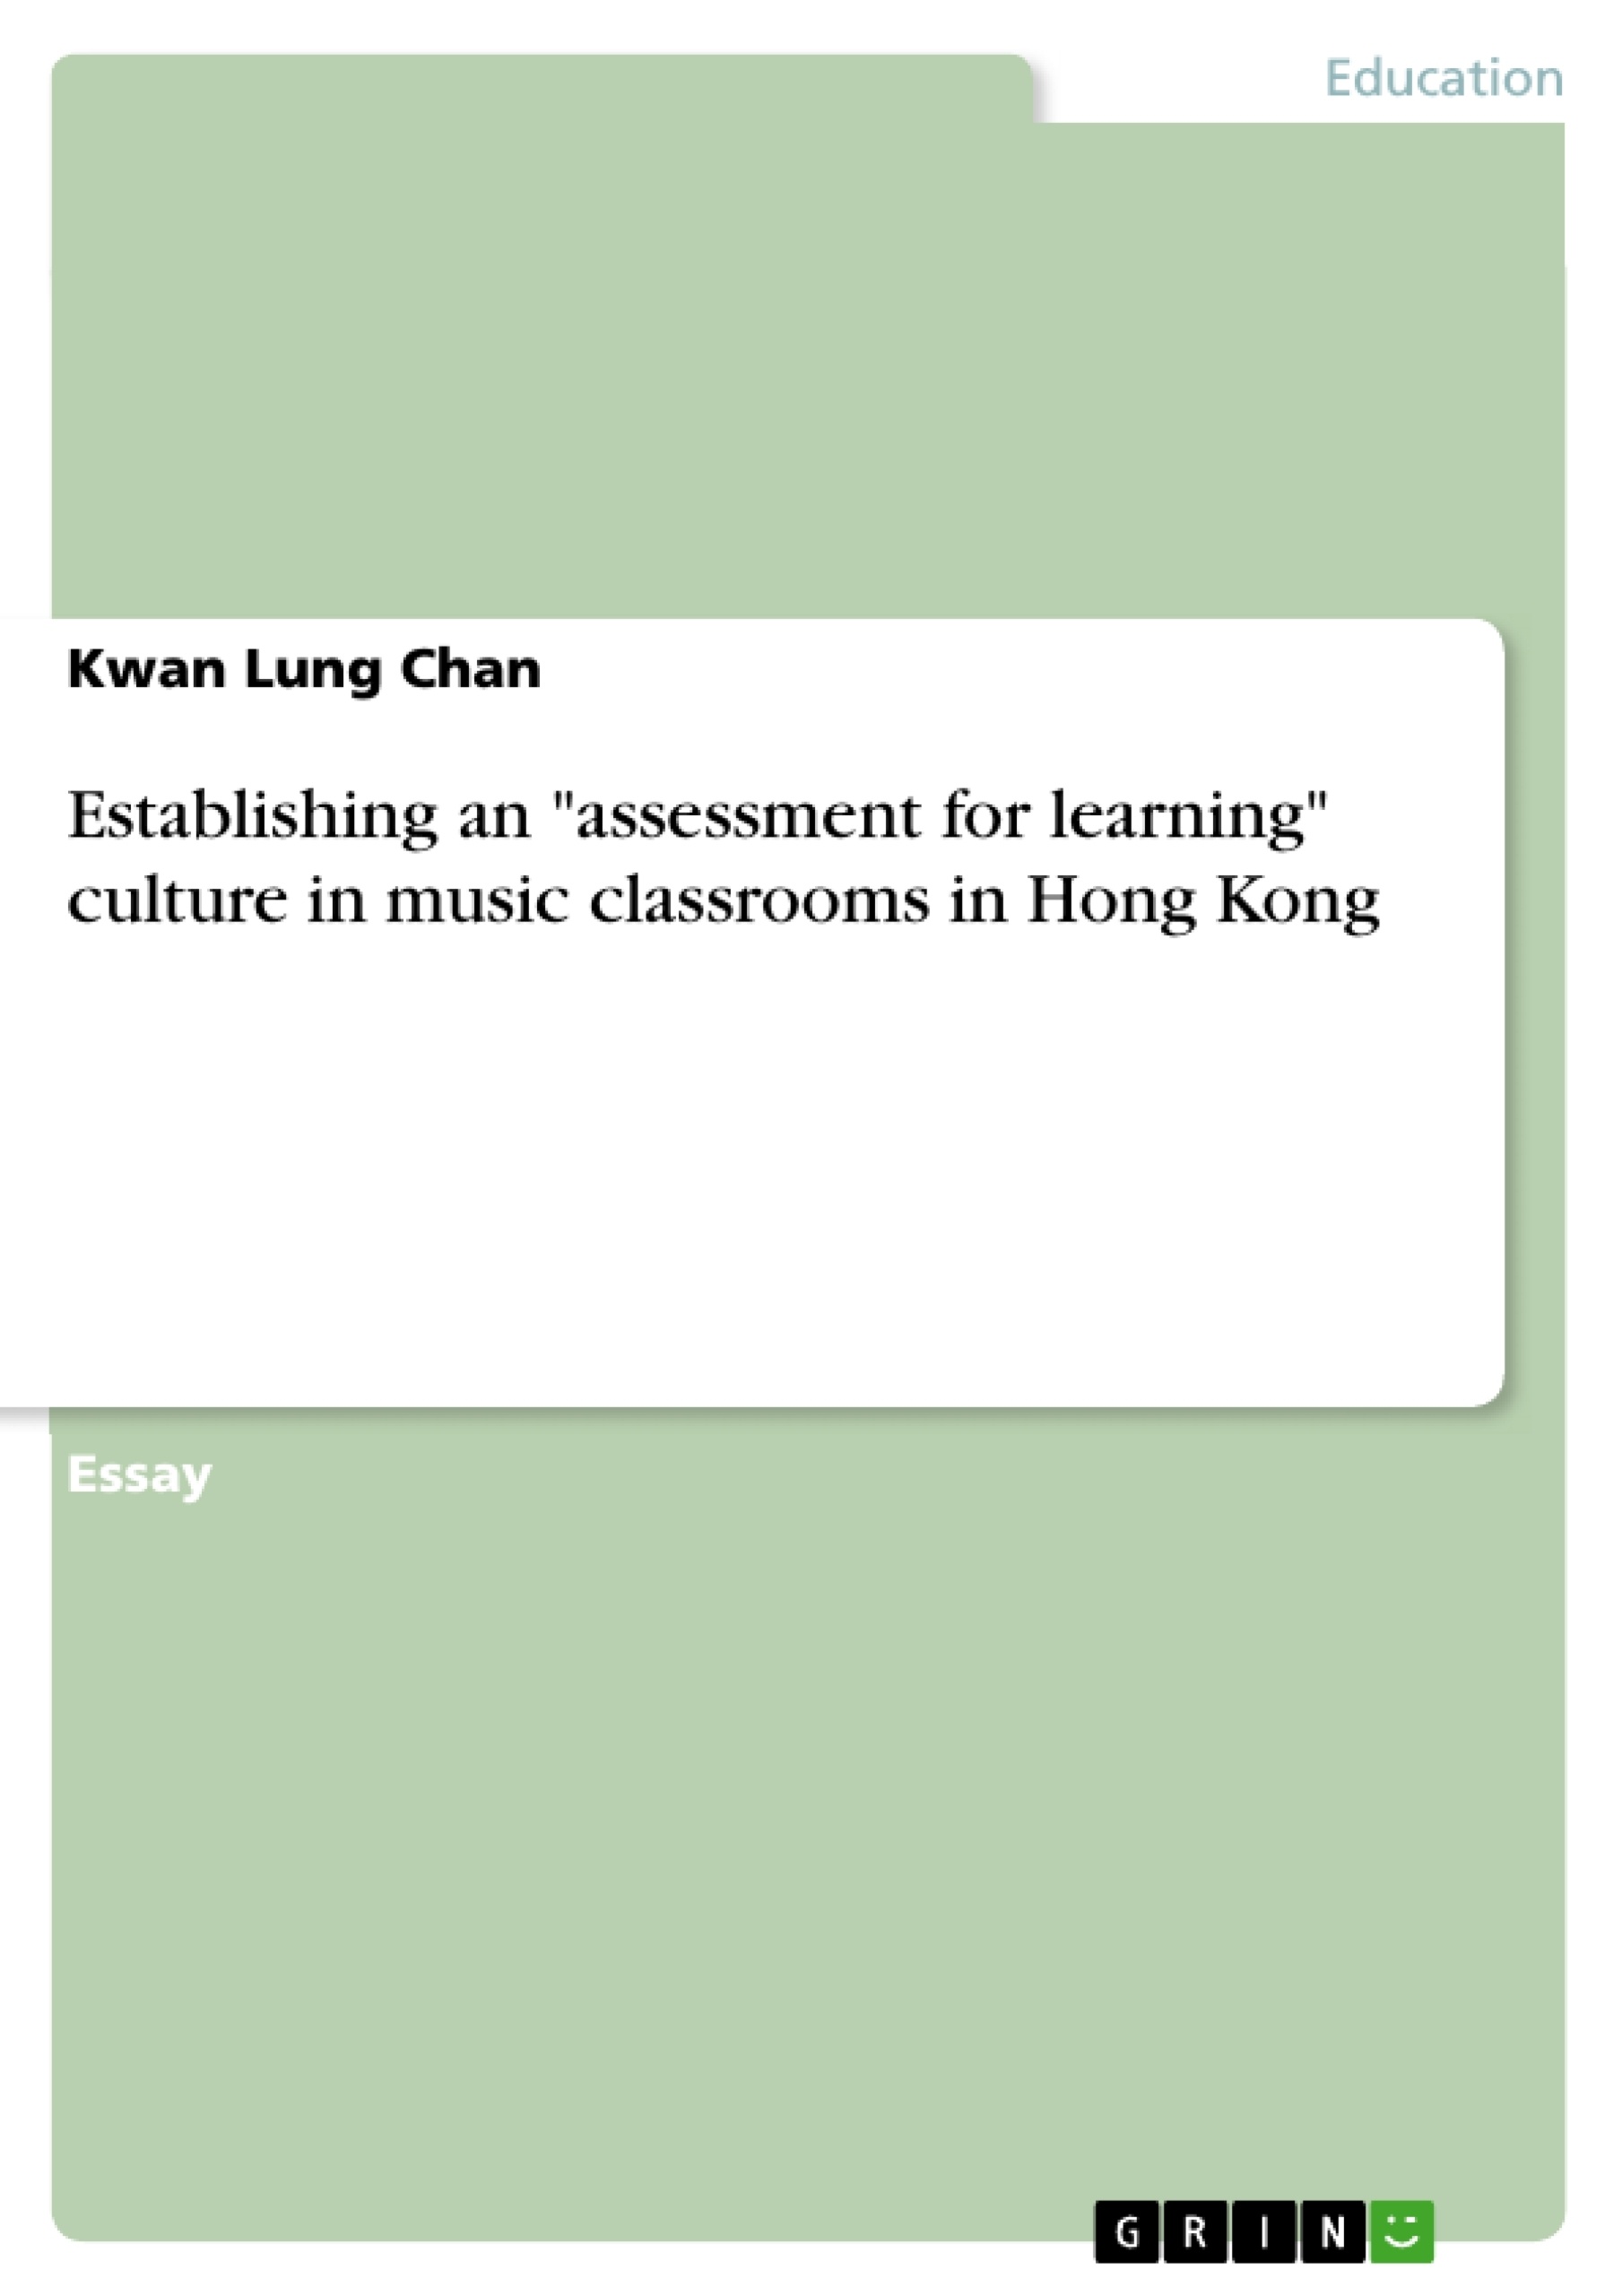 Título: Establishing an "assessment for learning" culture in music classrooms in Hong Kong